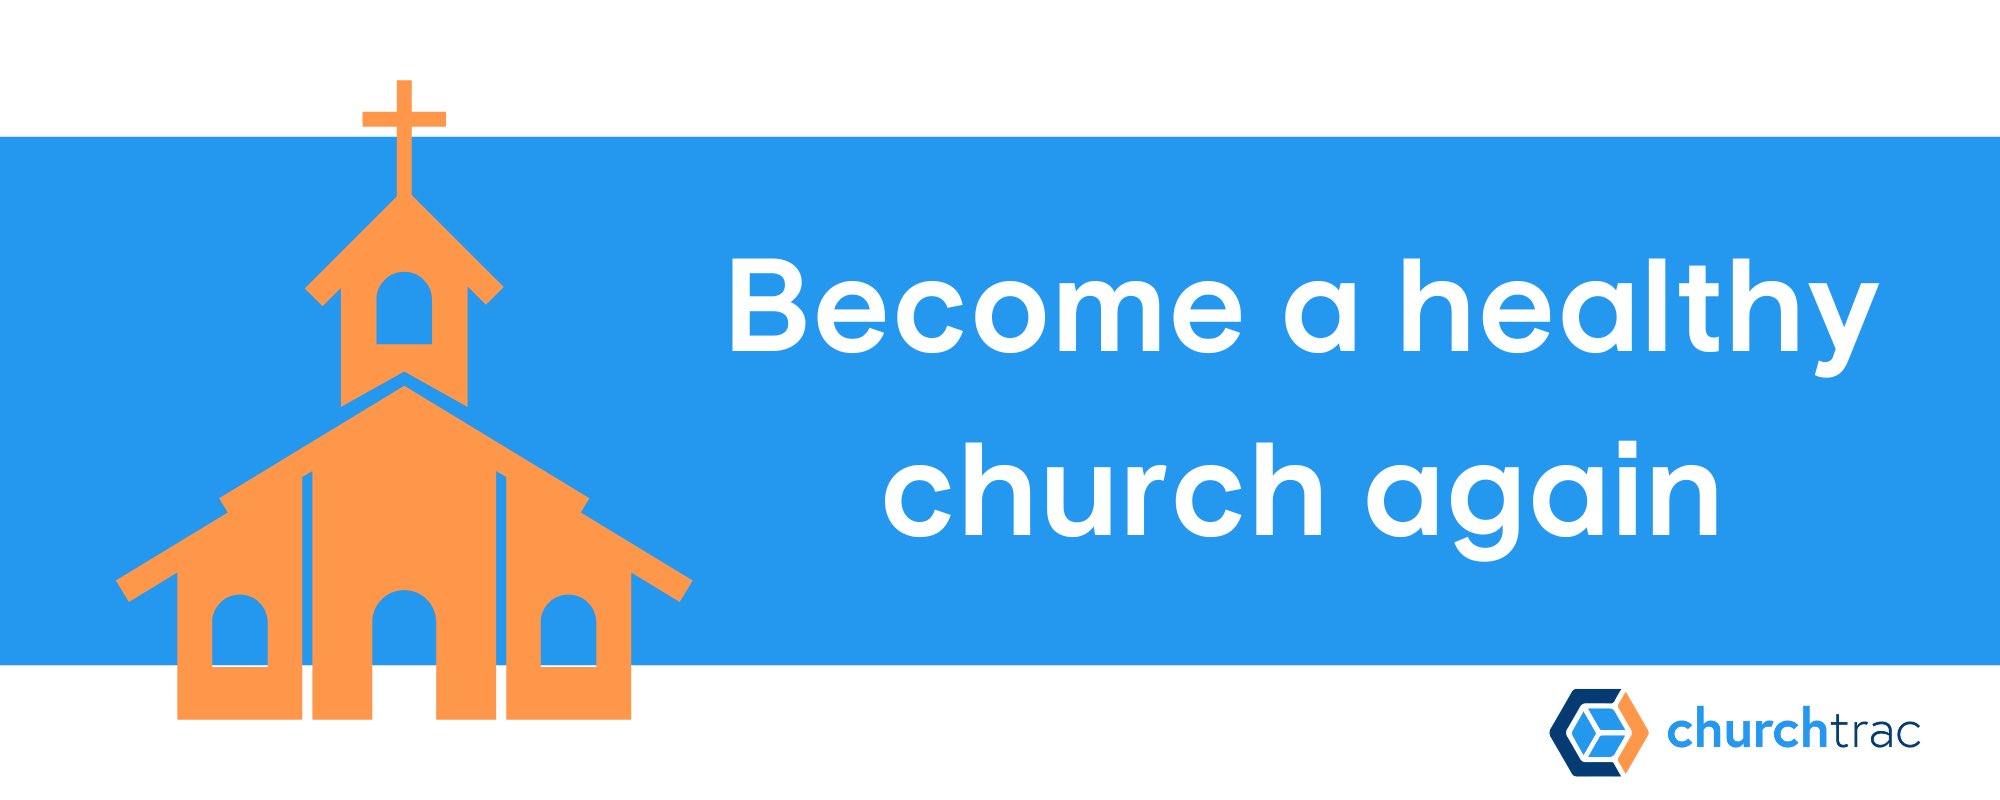 Church revitalization is the secret to becoming a healthy and effective church once again